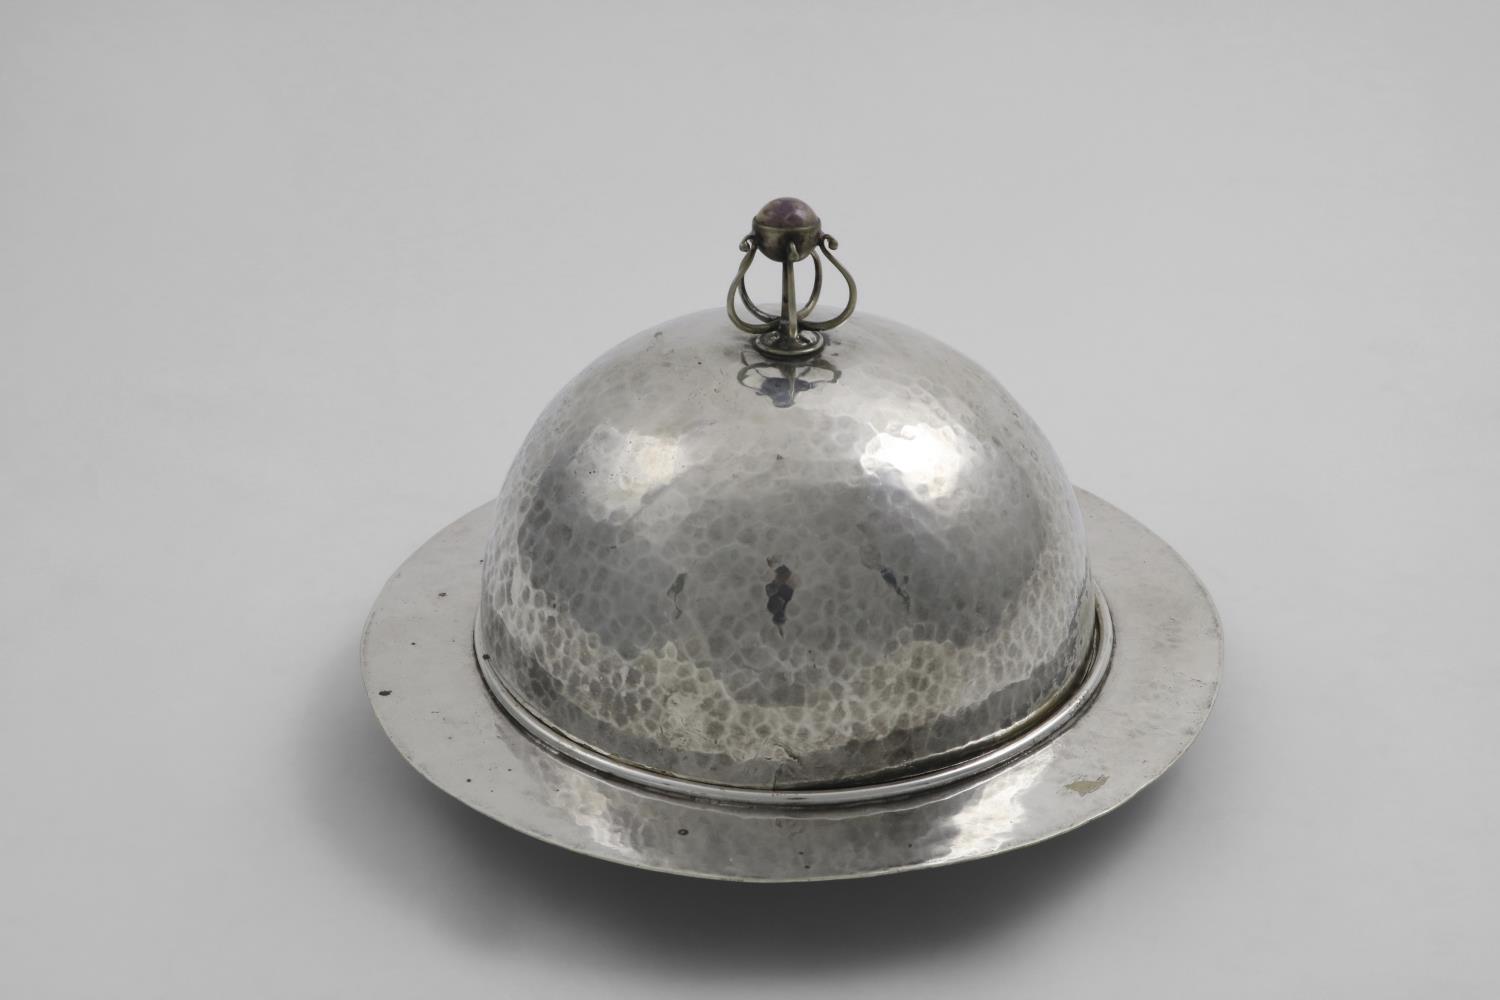 AN ART & CRAFTS ELECTROPLATED MUFFIN DISH & COVER with a hammered finish, the wirework finial set